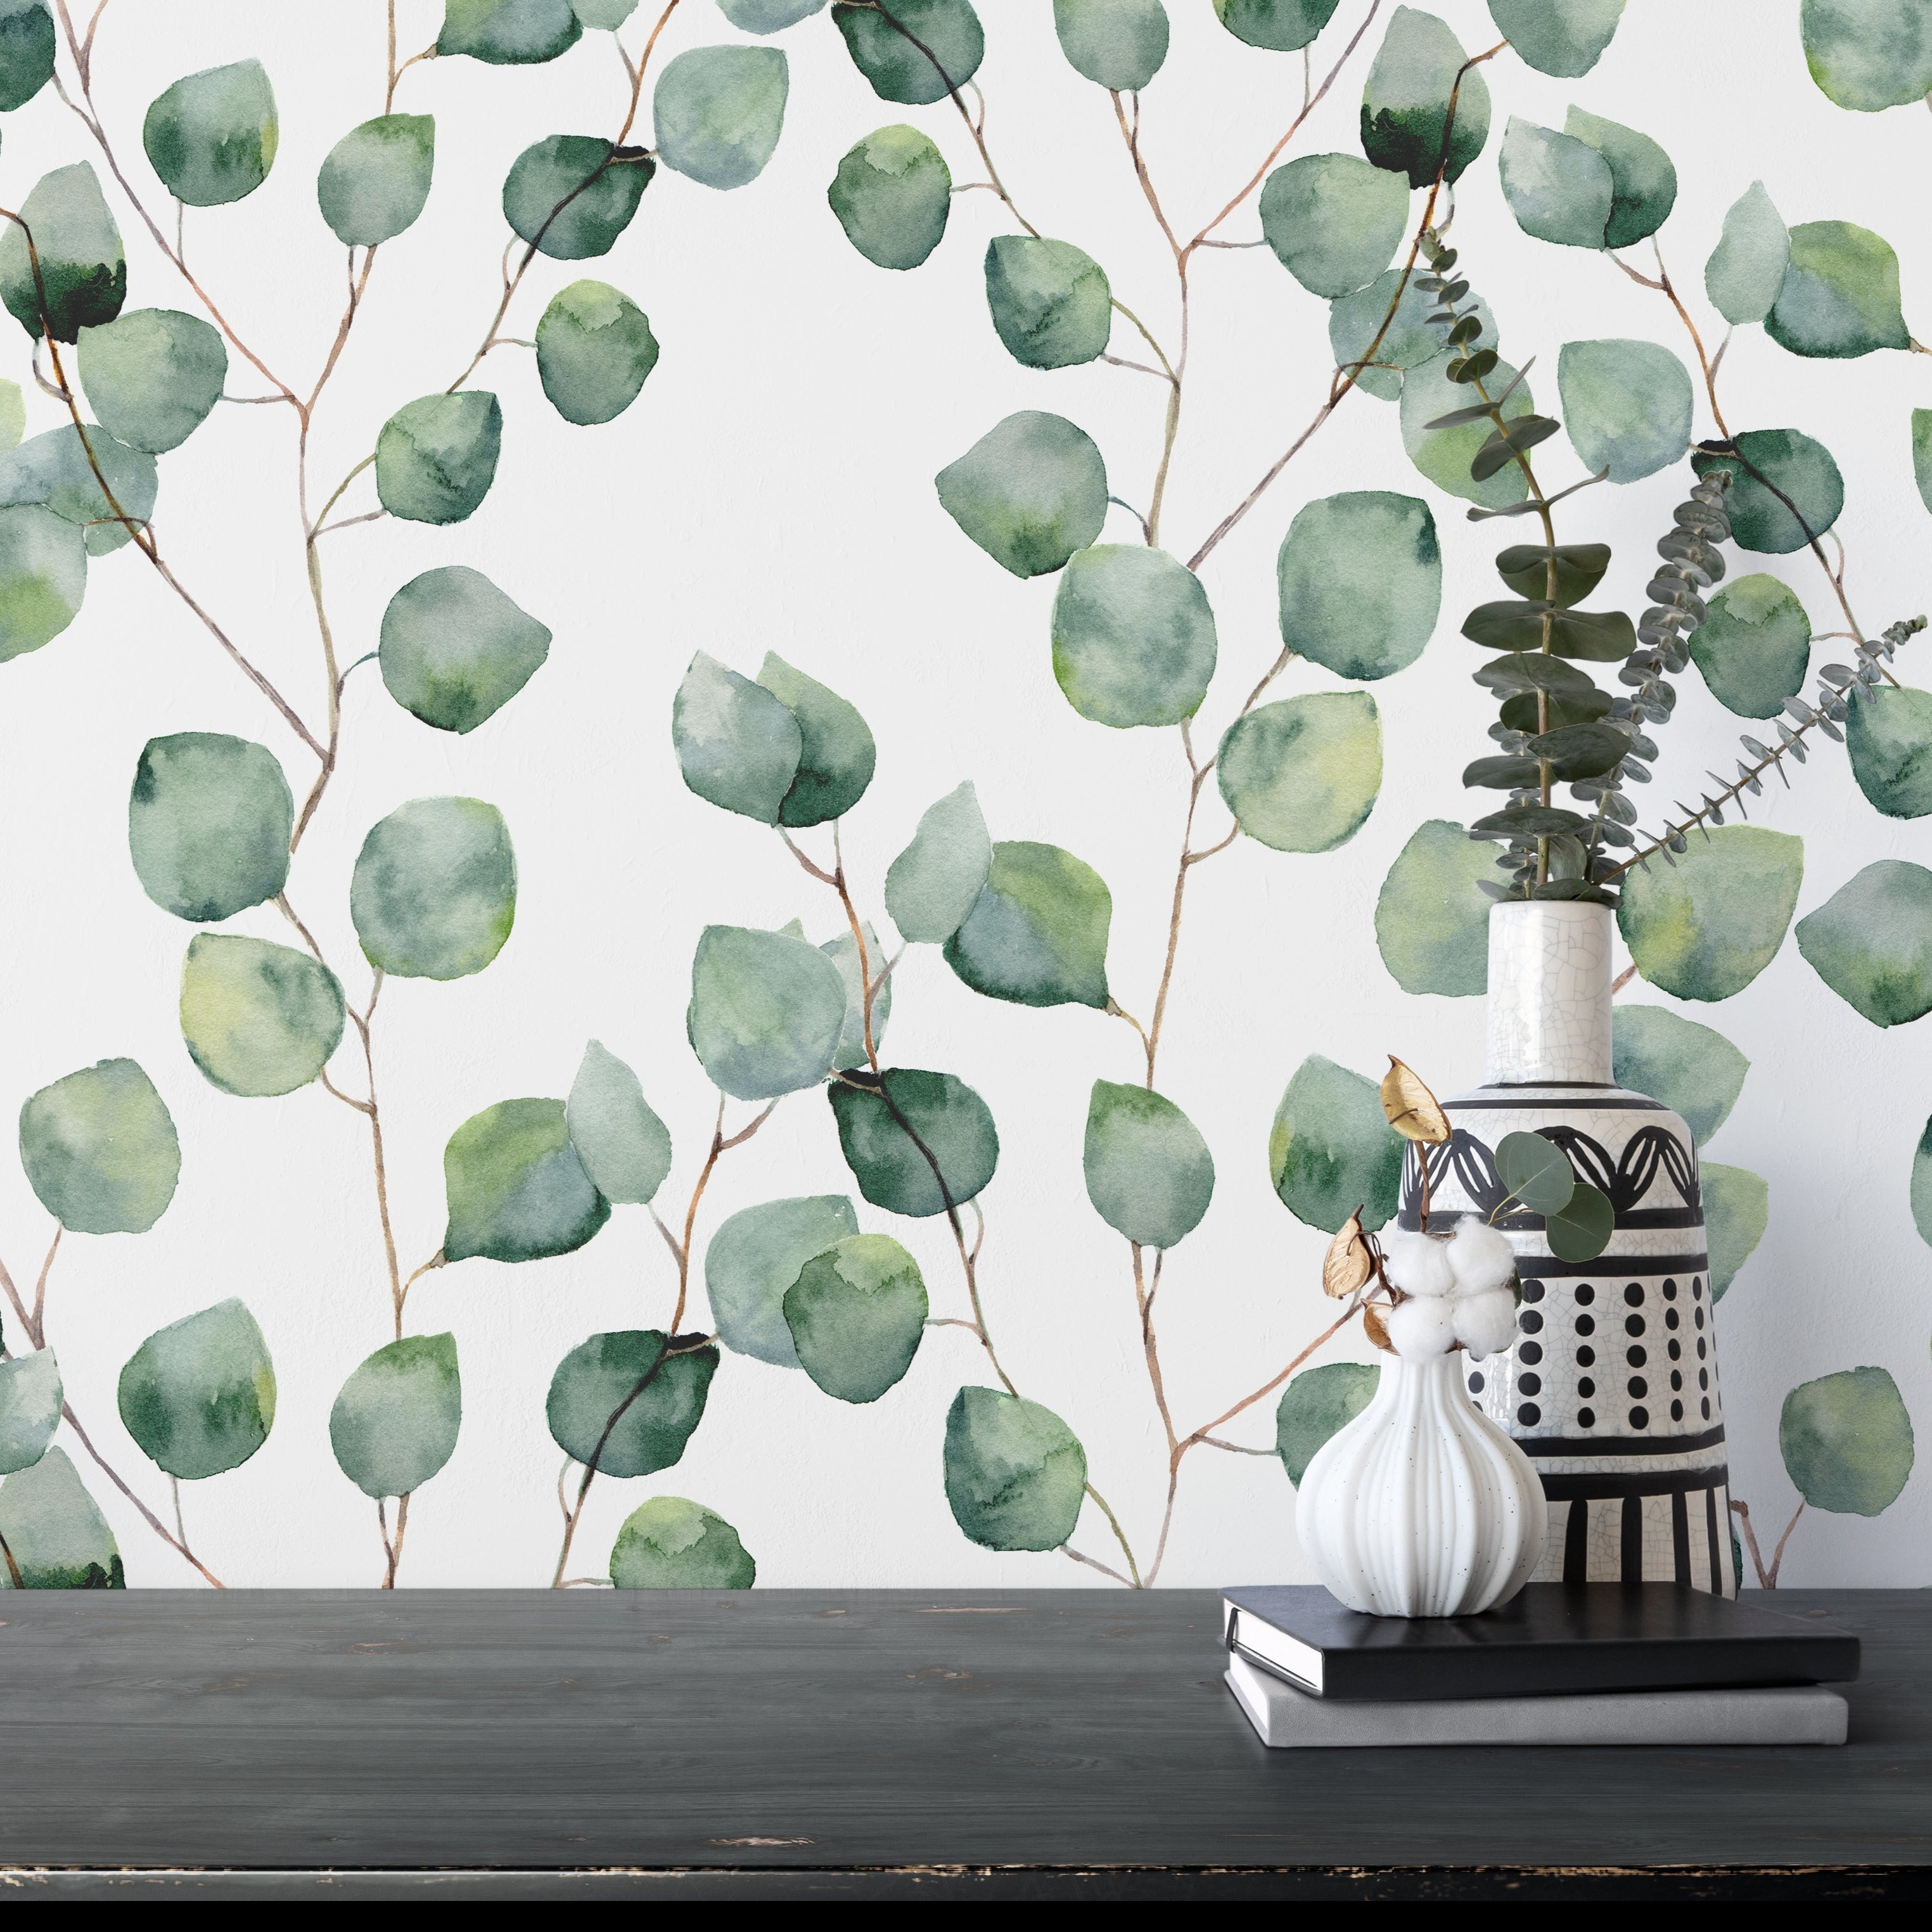 The Watercolour Floral Wallpaper - Eucalyptus features a detailed pattern of eucalyptus branches in various shades of green, adding a tranquil and natural touch to the wall.